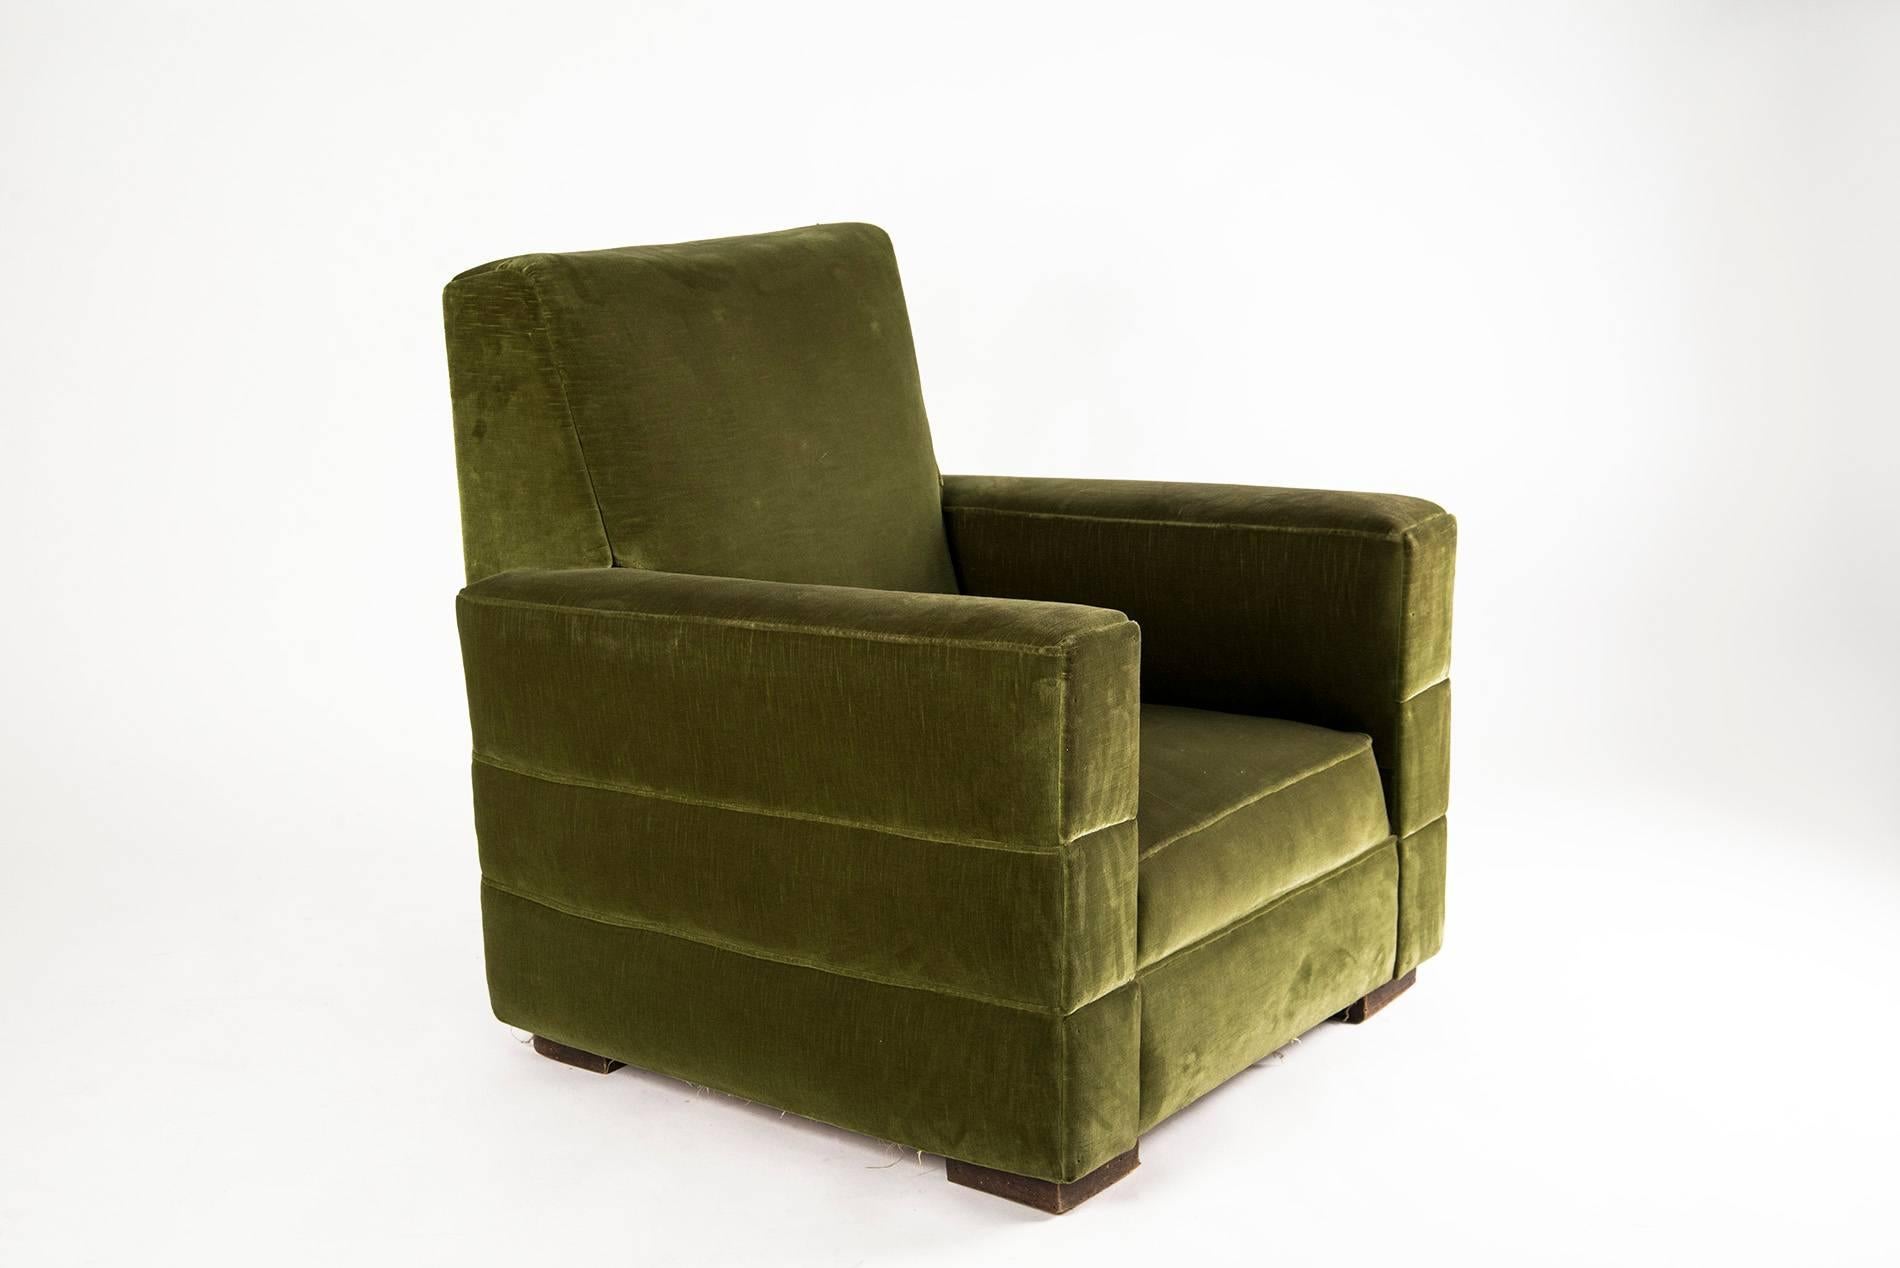 Impressive armchair designed by Guglielmo Ulrich, manufactured in Italy in 1942. Velvet covered upholstery, wooden feet. Good vintage conditions.